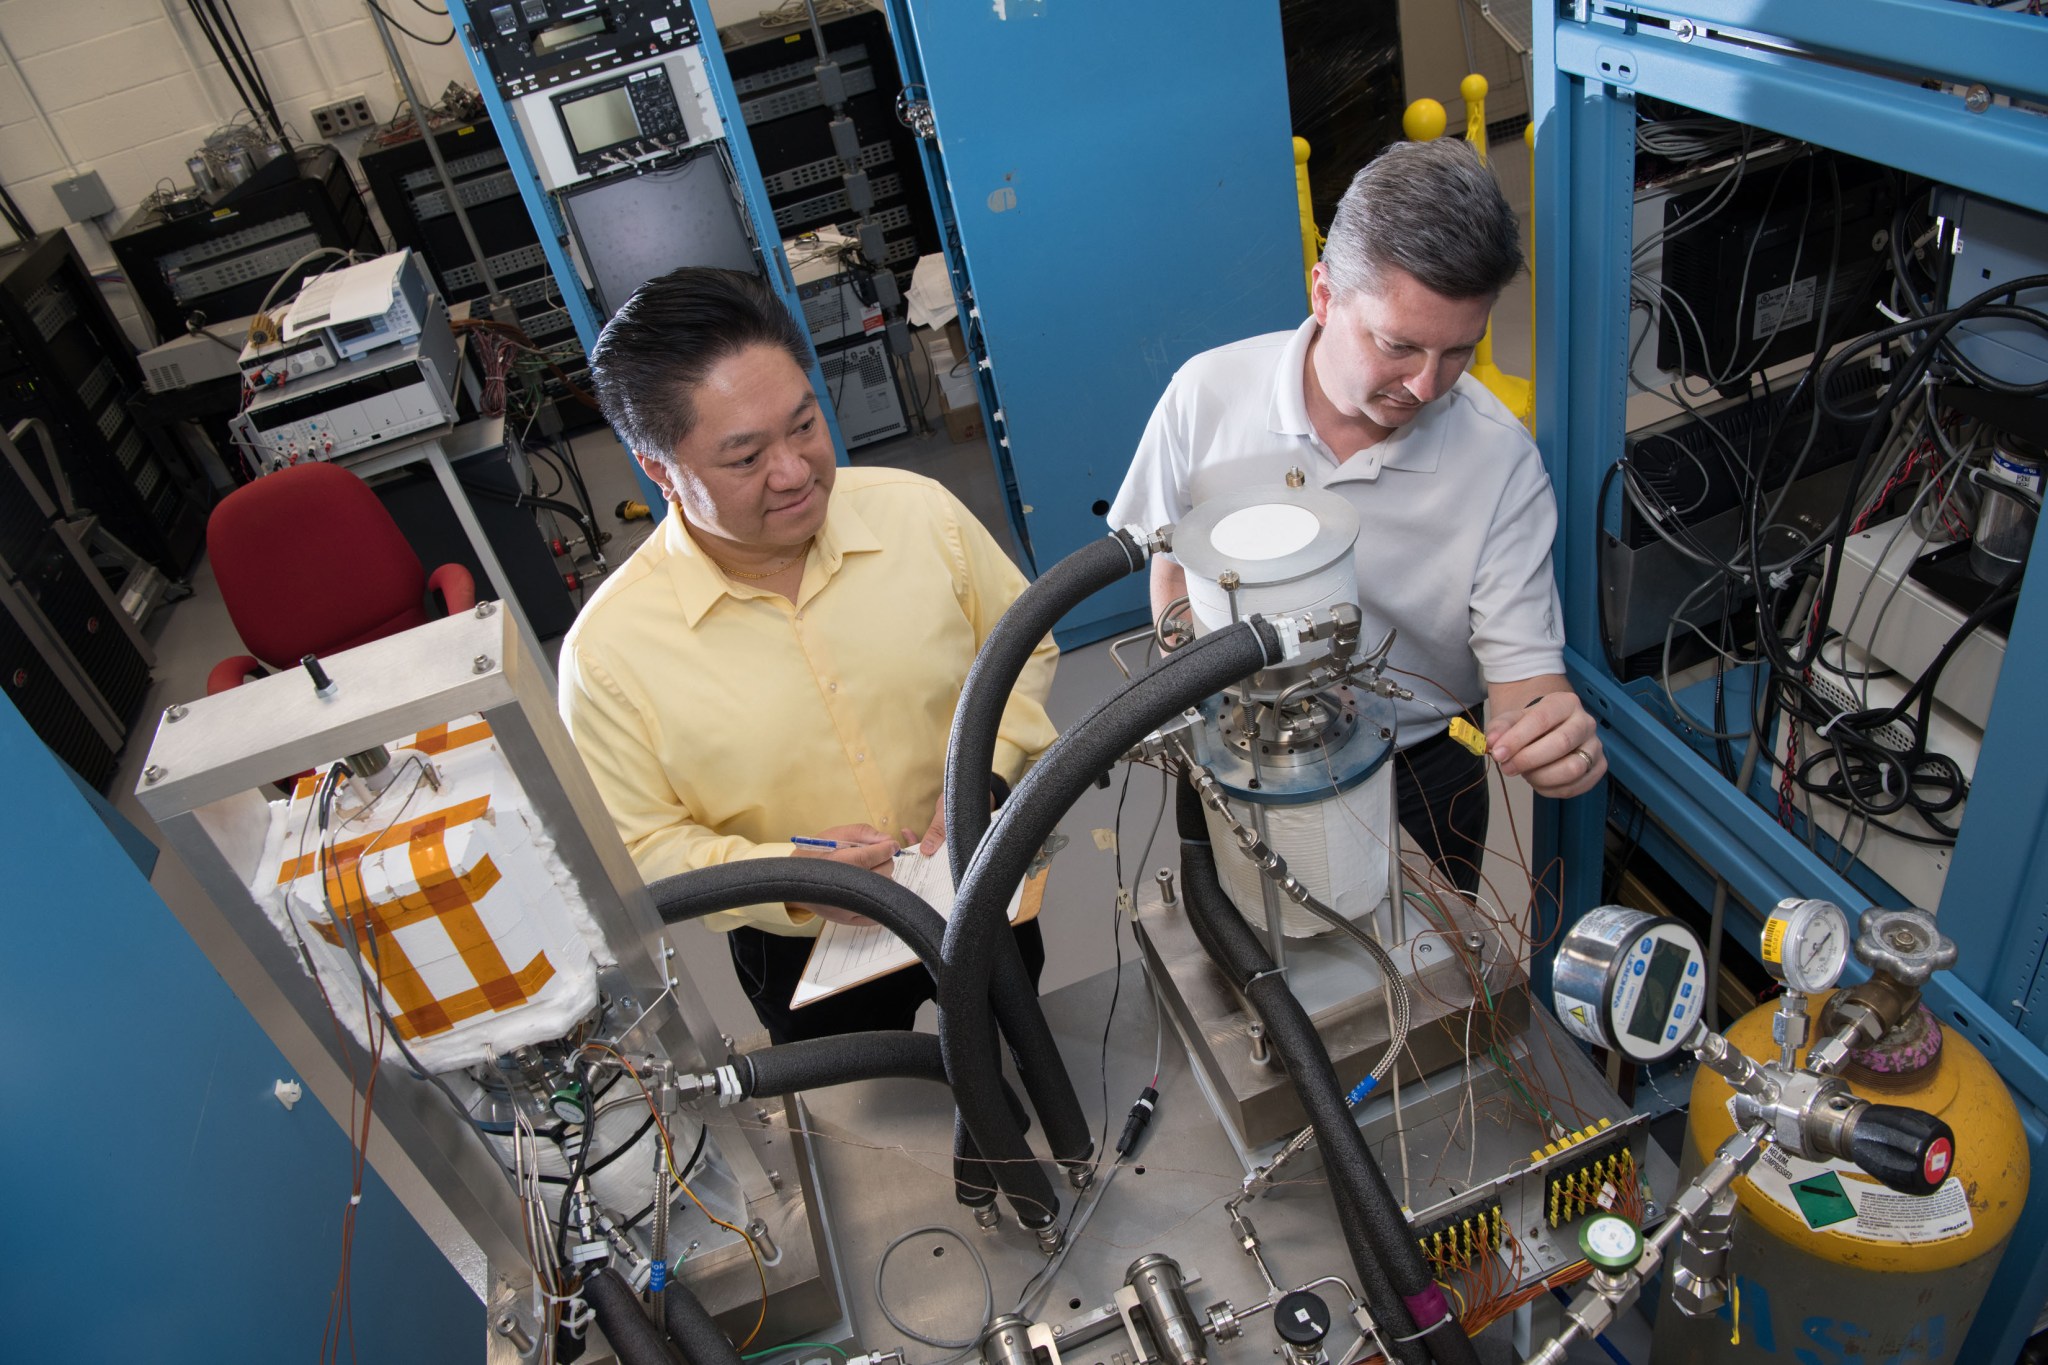 Two researchers stand in a lab examining the model of a power generator.